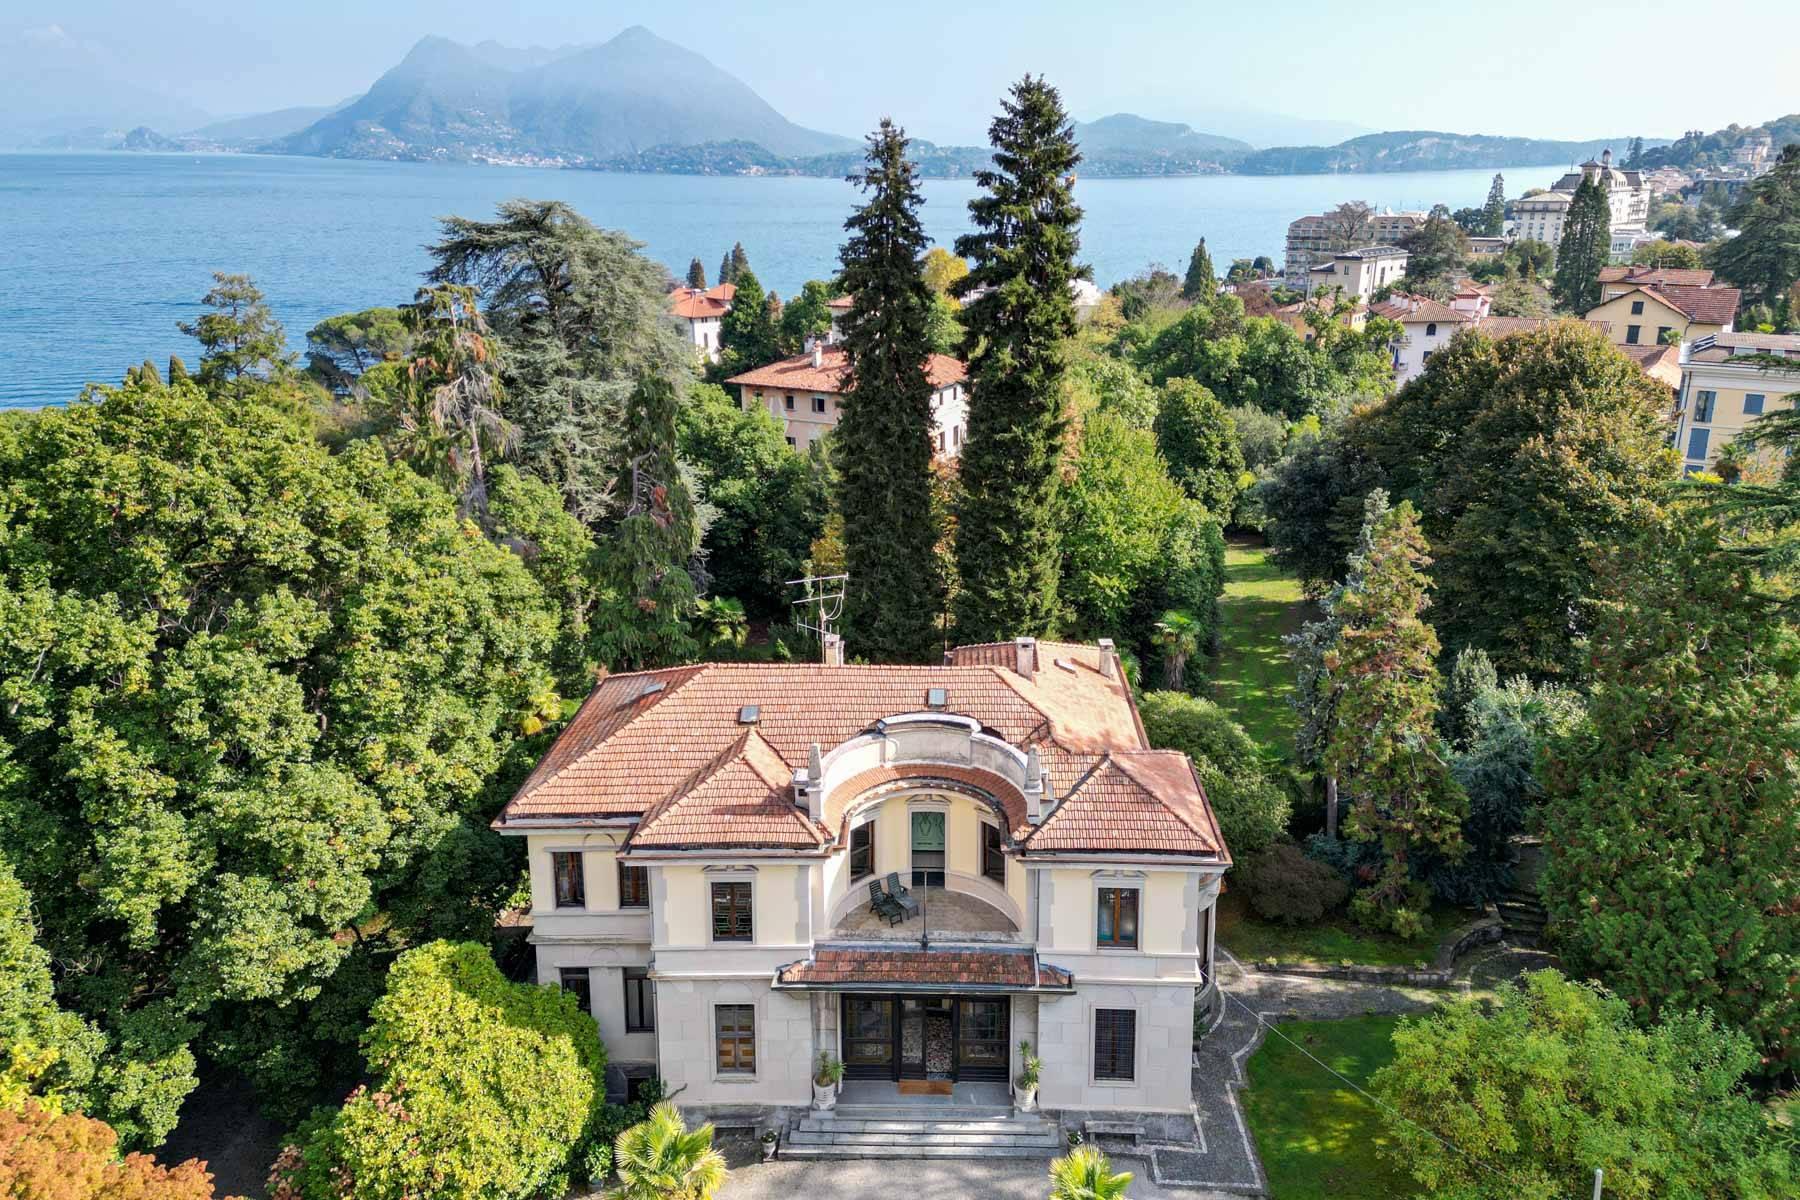 Enchanting Art Nouveau villa immersed in a splendid centuries-old park in the heart of Stresa - 1